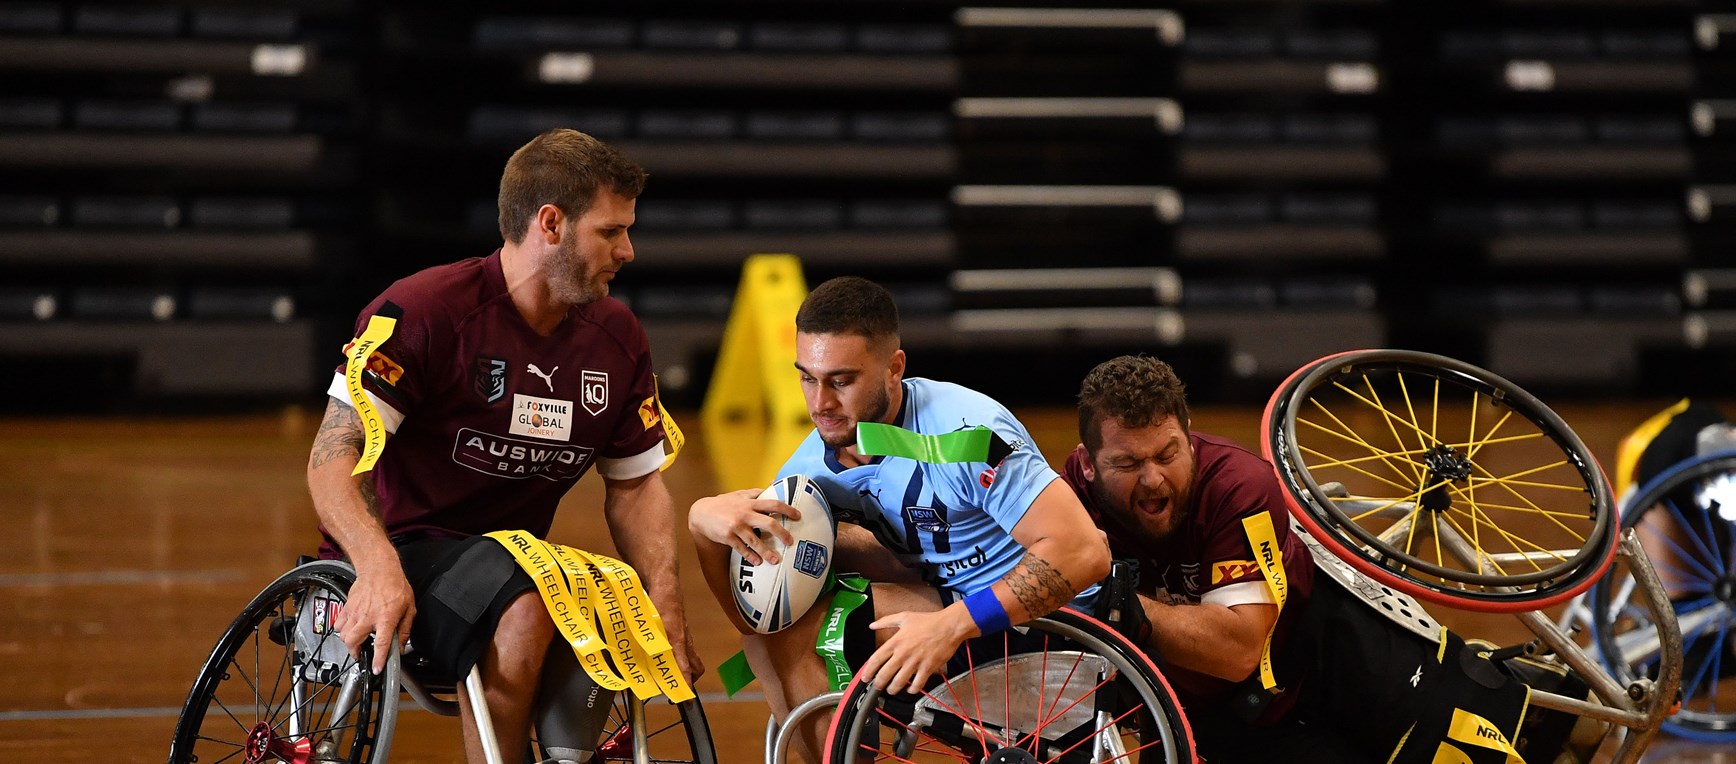 The best photos from Wheelchair State of Origin